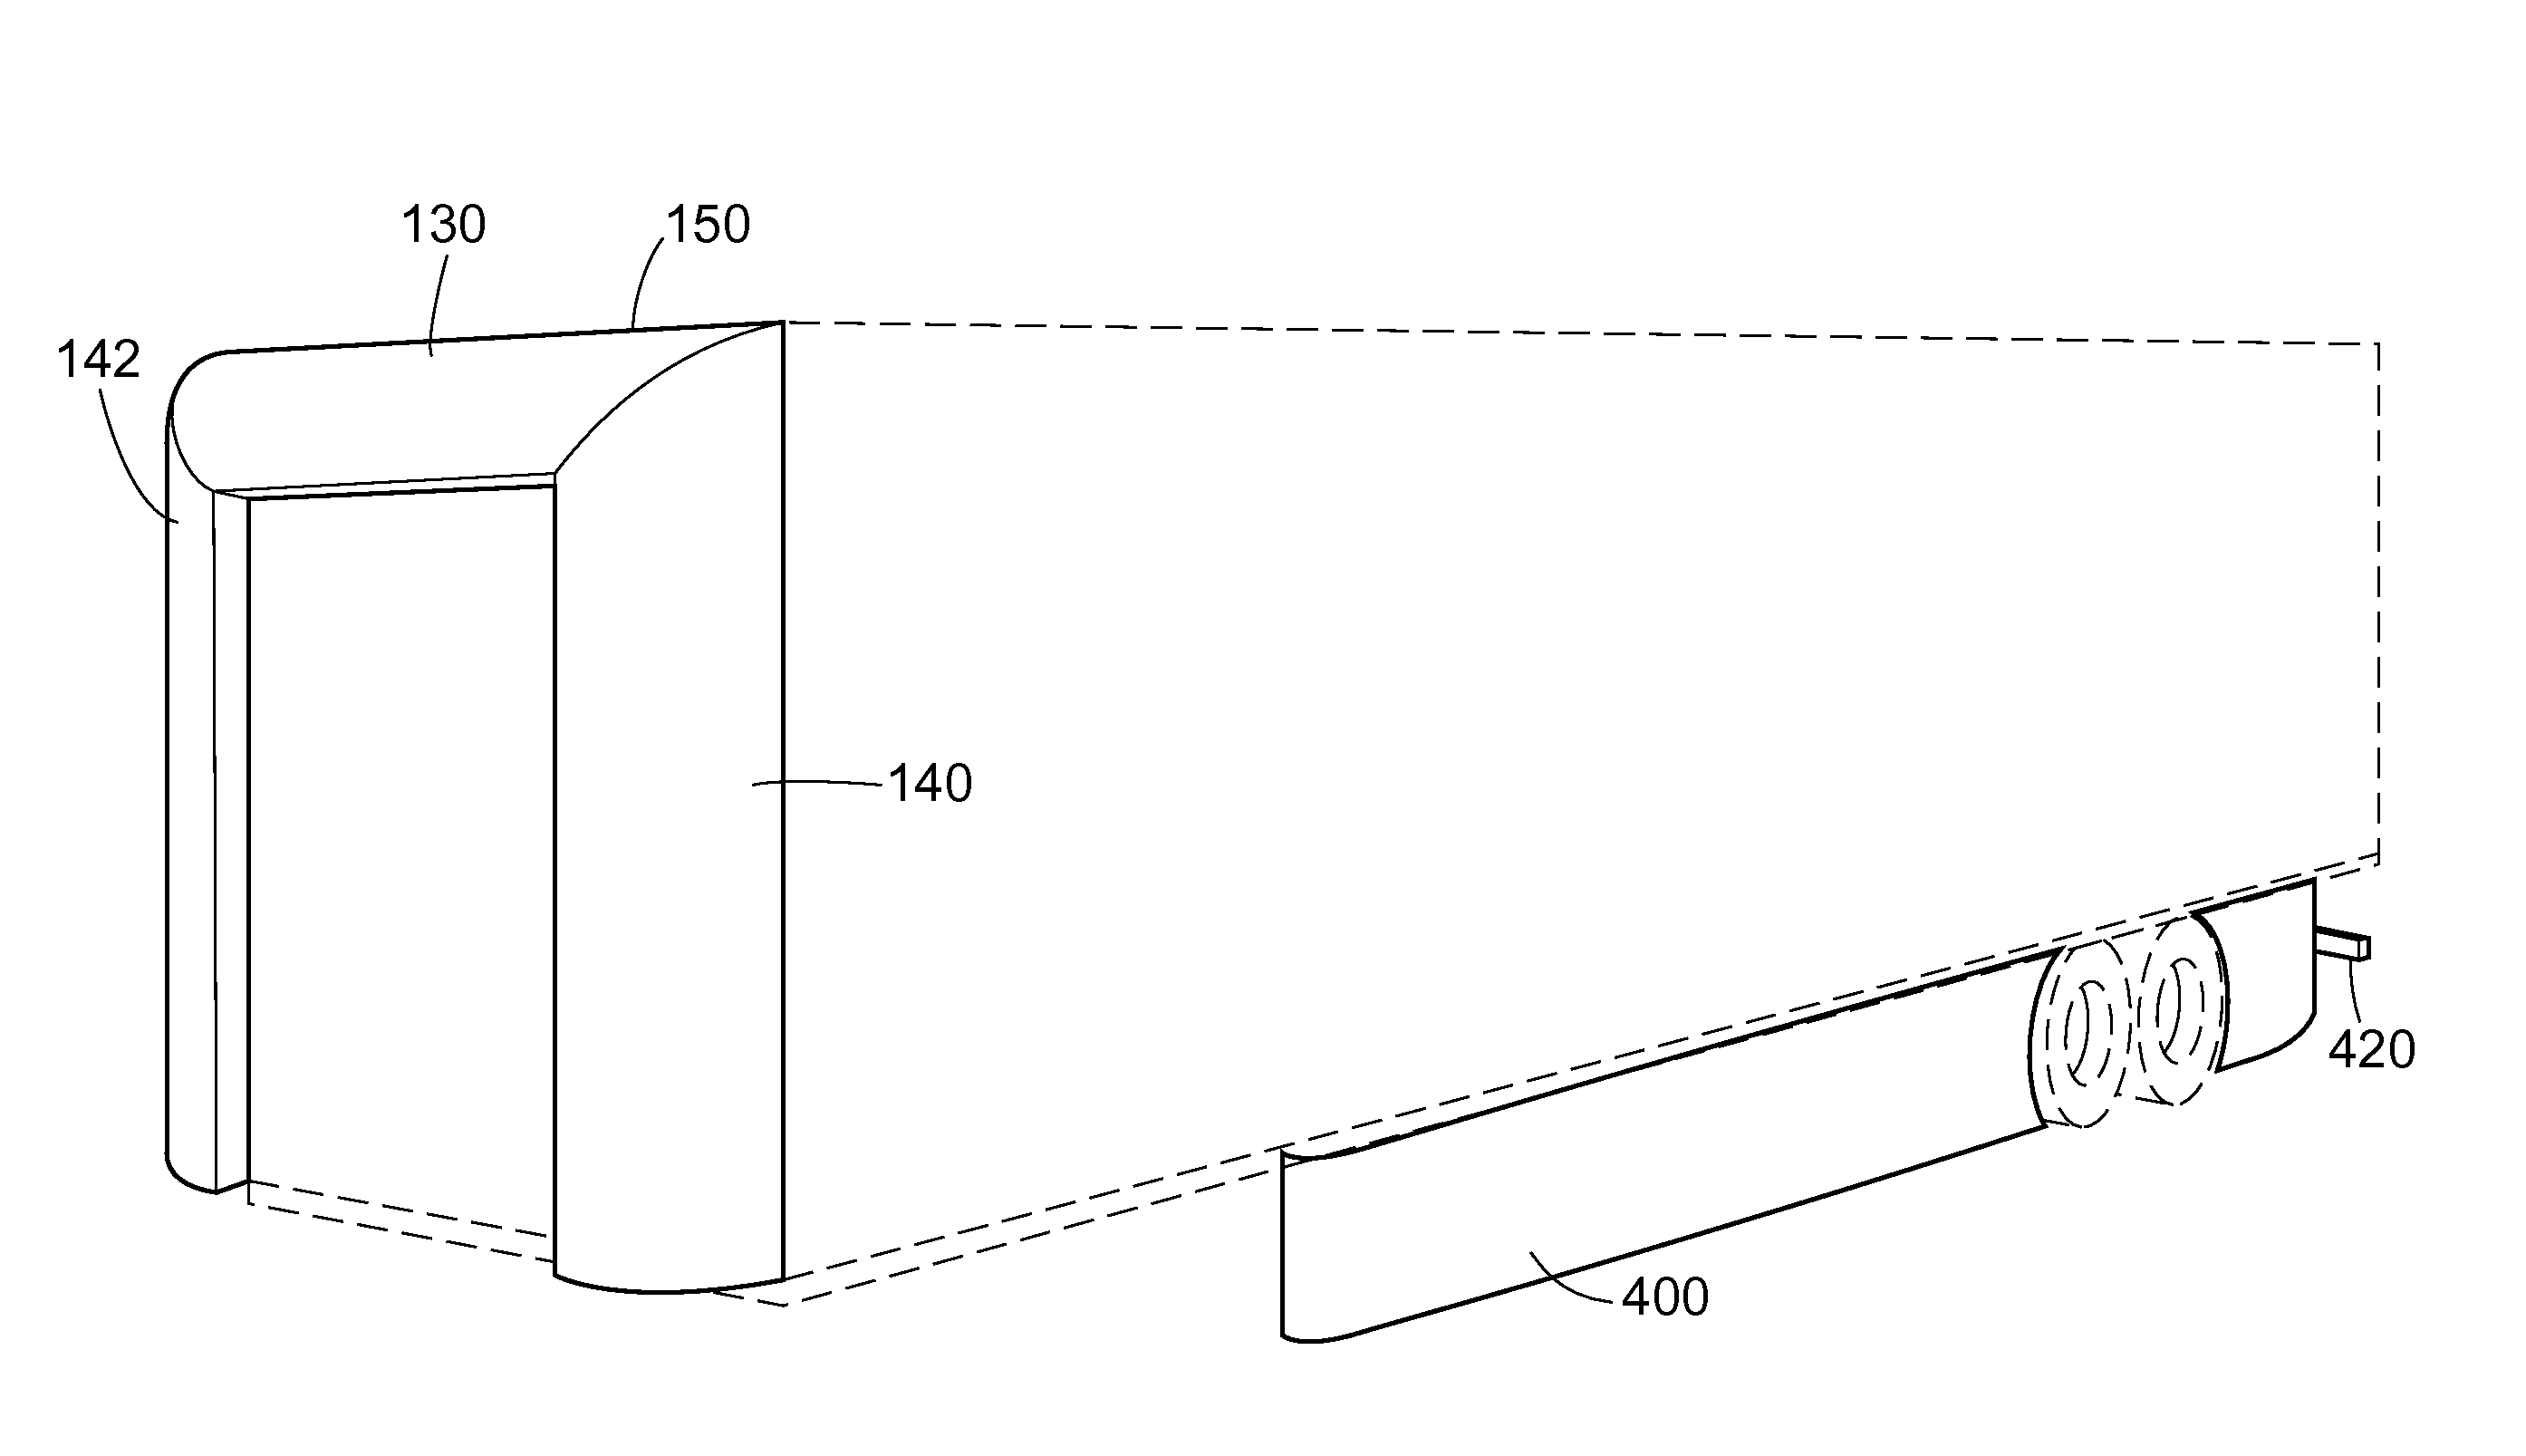 Vehicle fairing structure